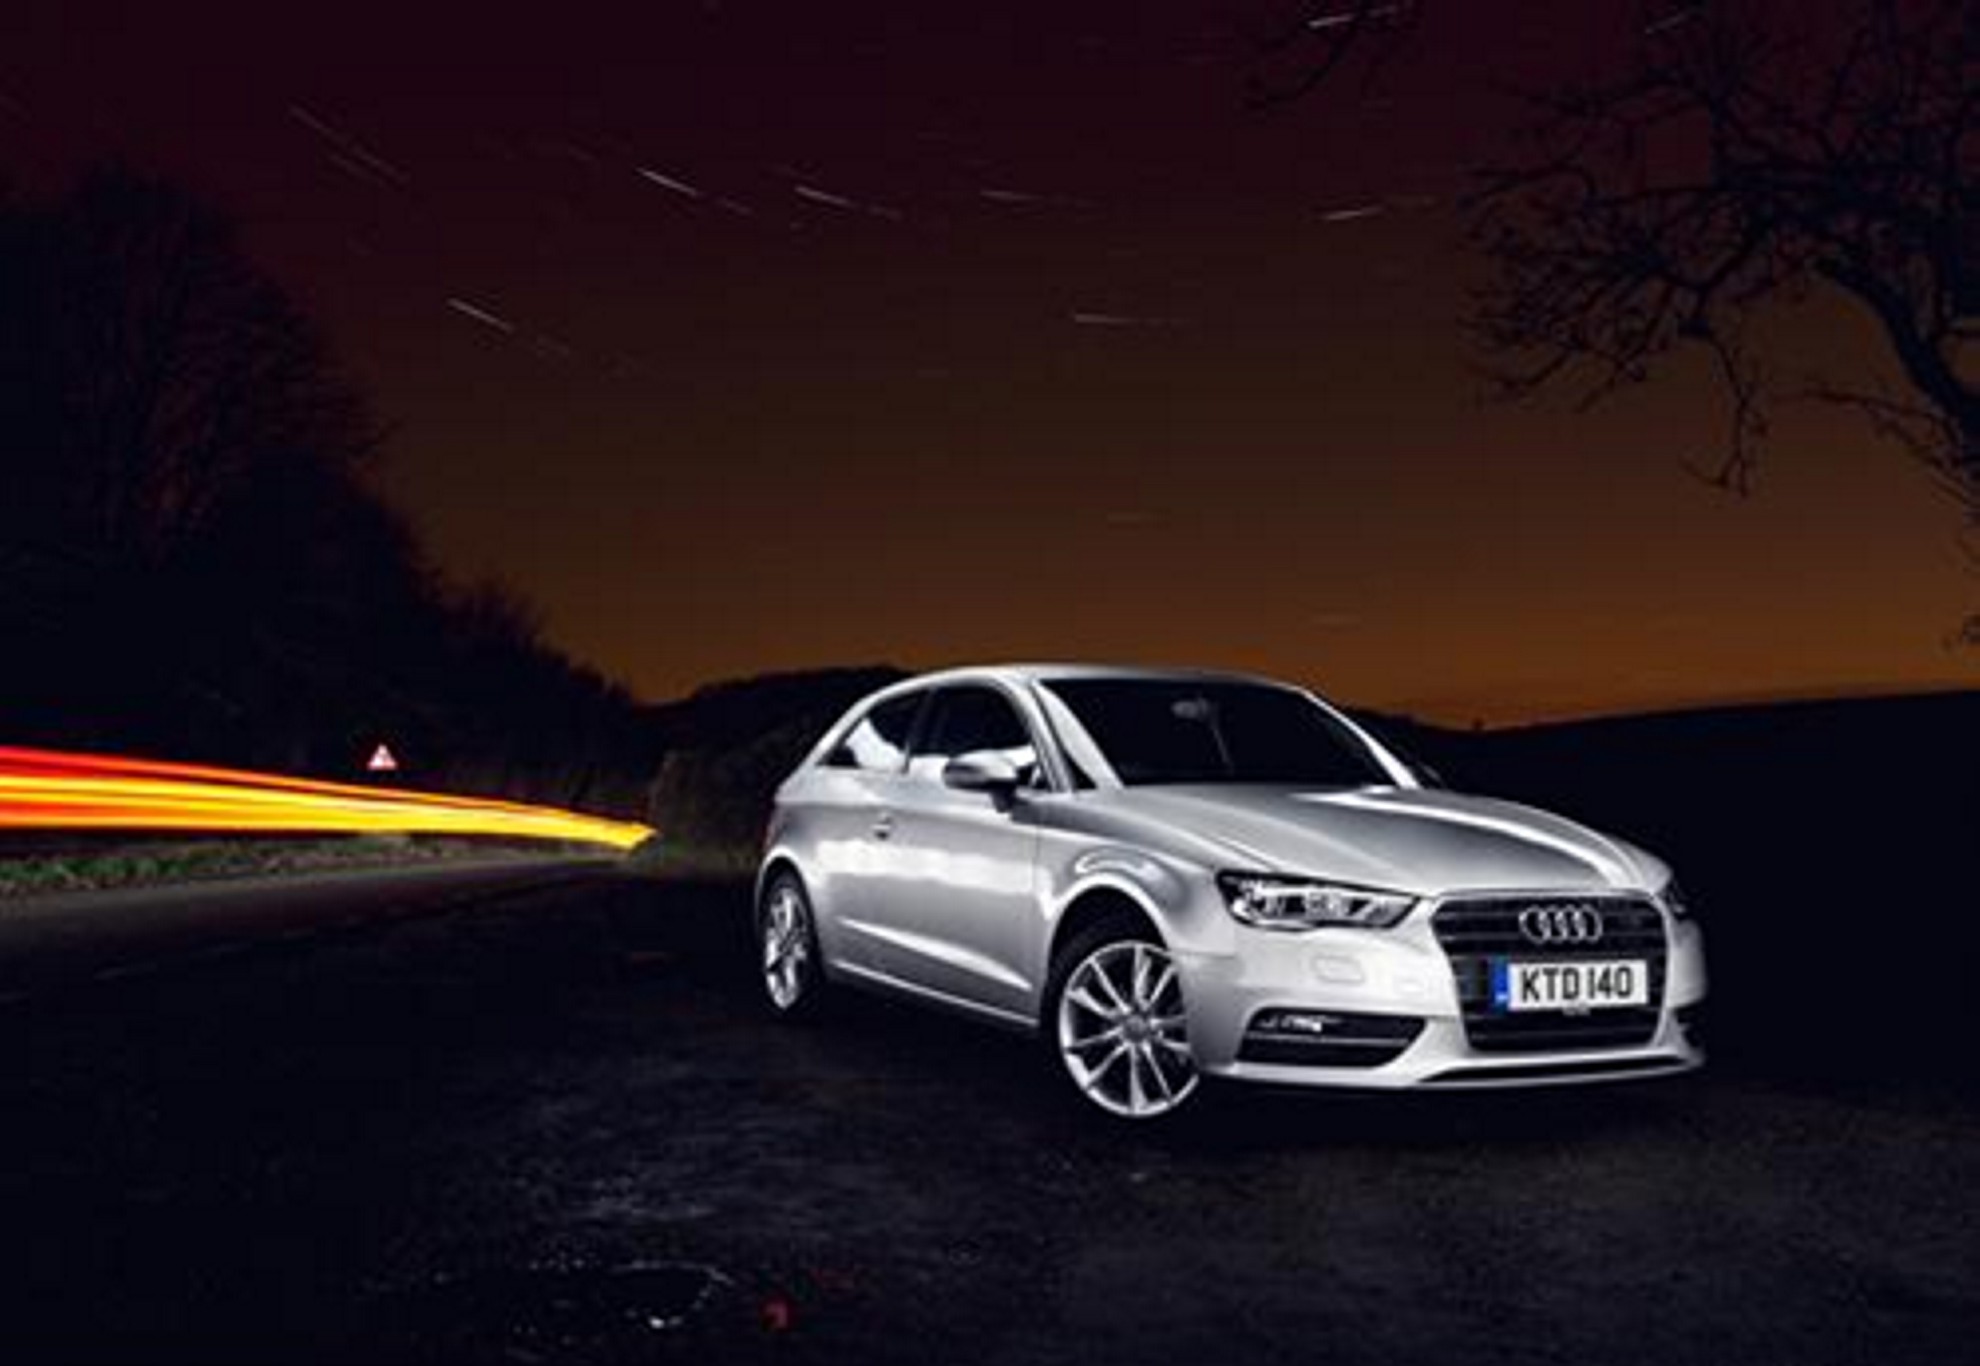 AUDI SHINES BRIGHT TO MARK THE SHORTEST DAY OF THE YEAR